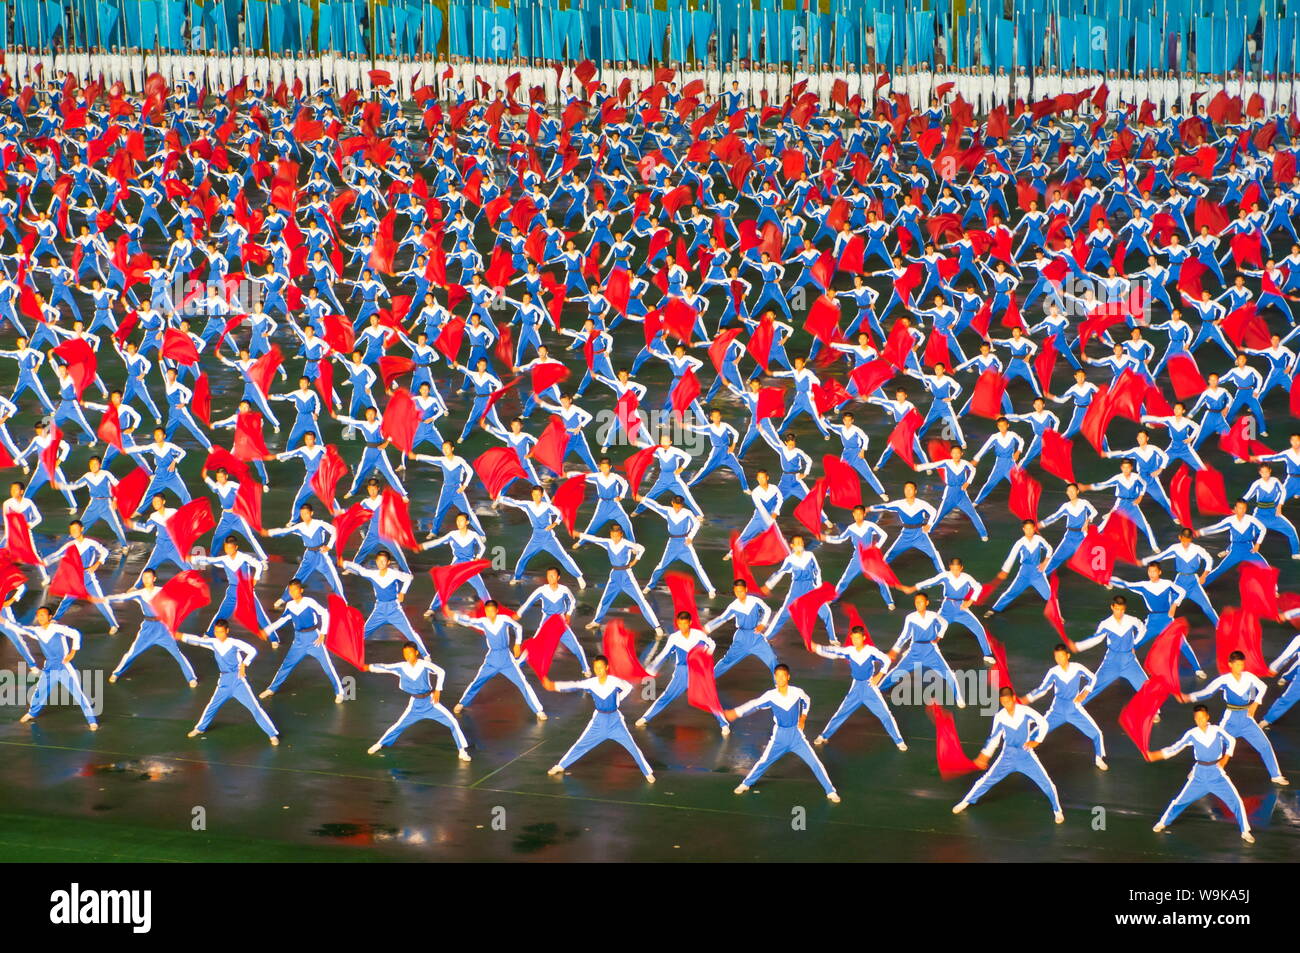 Dancers and acrobats at the Arirang festival, Mass games in Pyongyang, North Korea, Asia Stock Photo